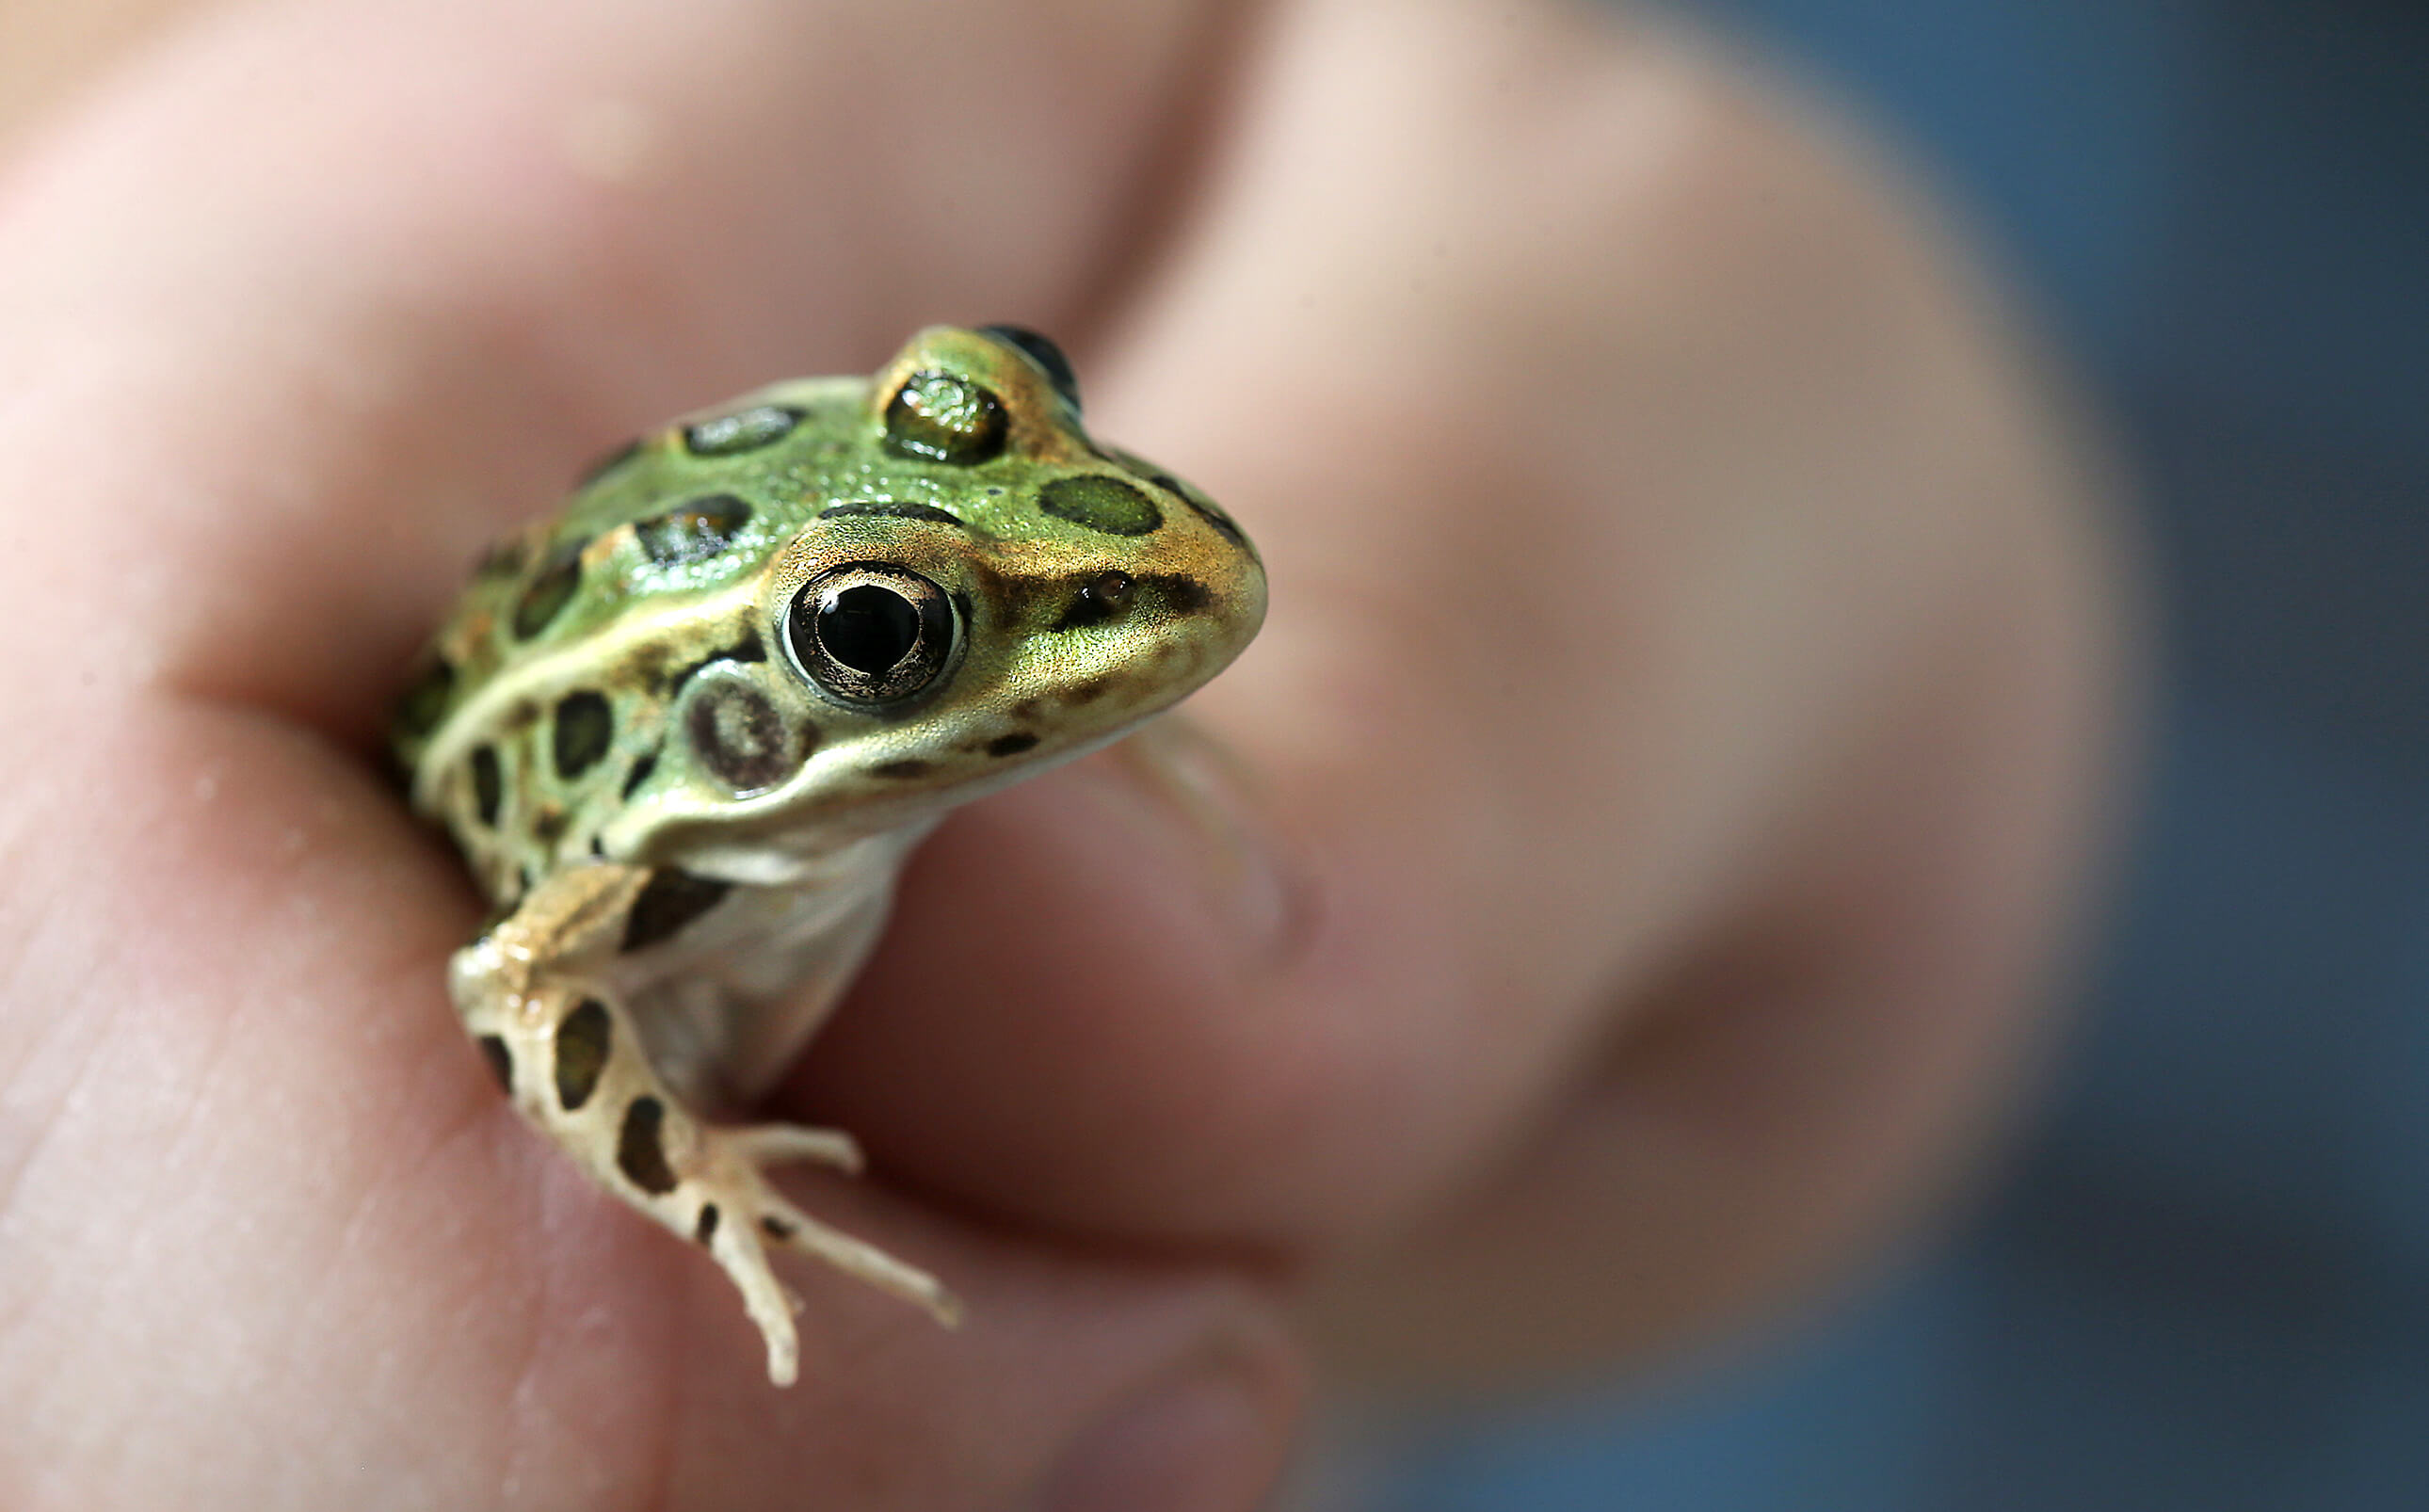 Research led by Purdue University professor Maria Sepúlveda revealed certain chemicals are stunting the growth of amphibians, including the northern leopard frog (shown here)